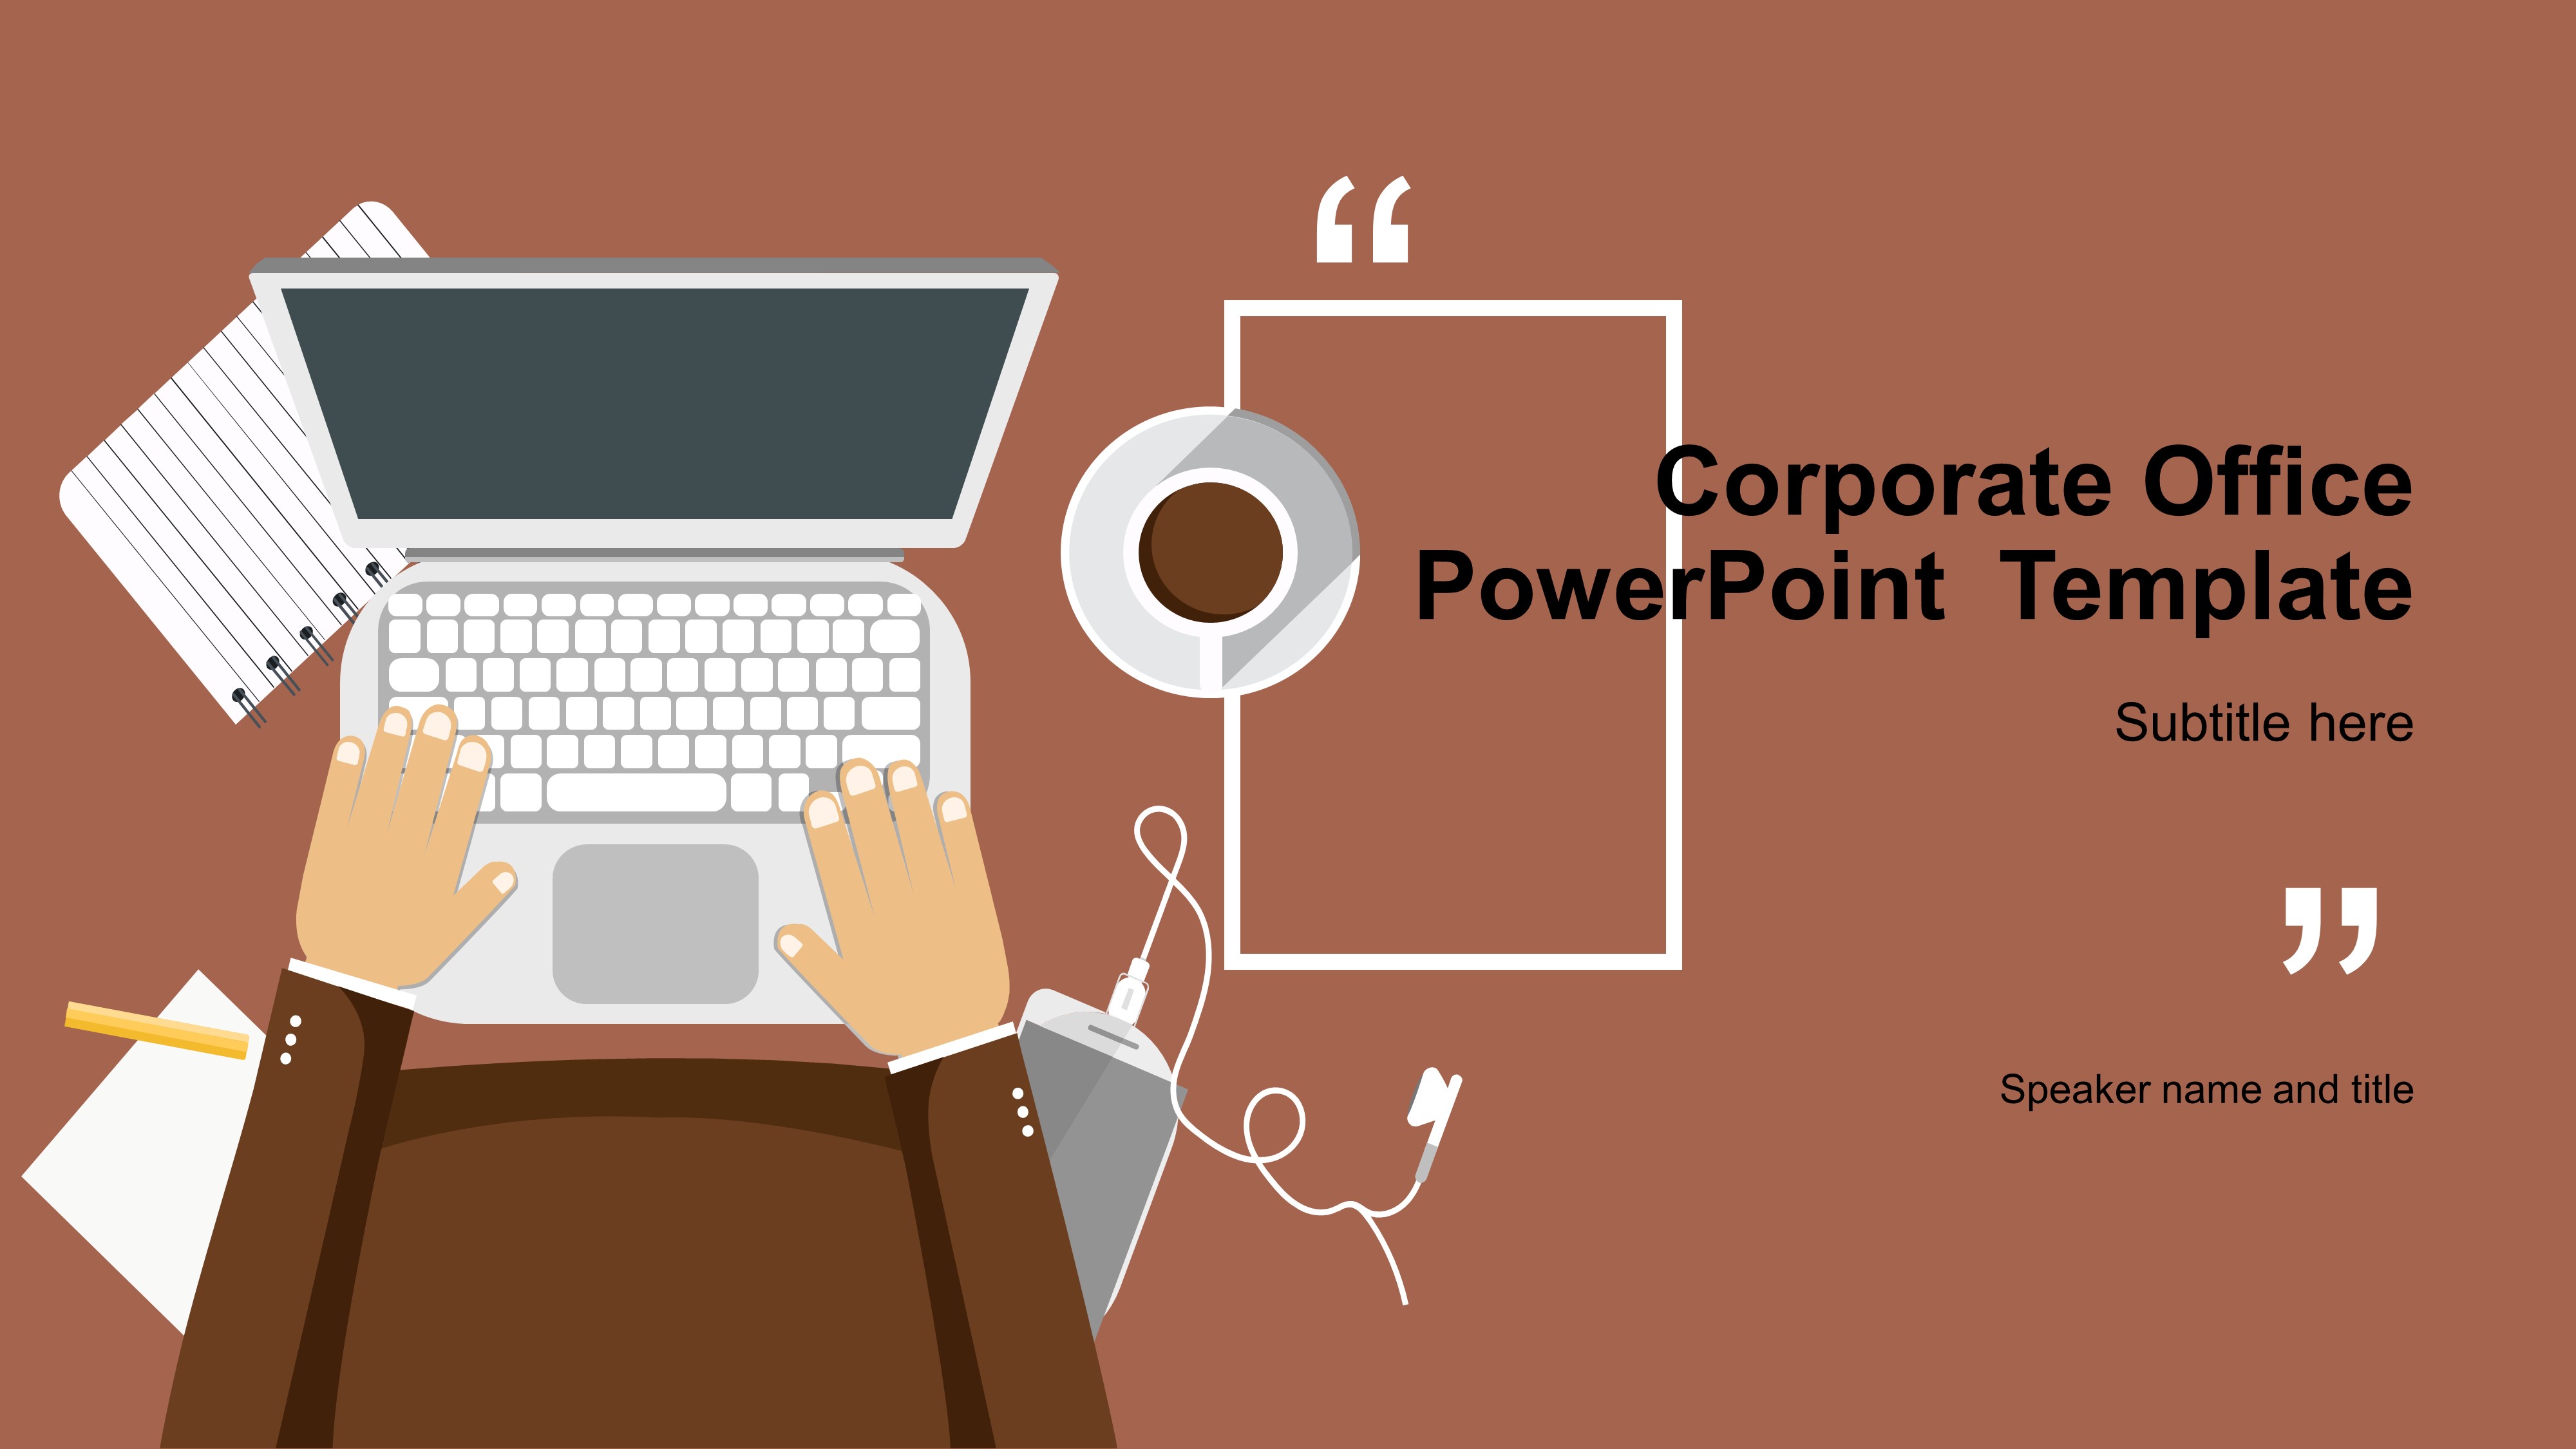 Corporate Office PowerPoint Templates 